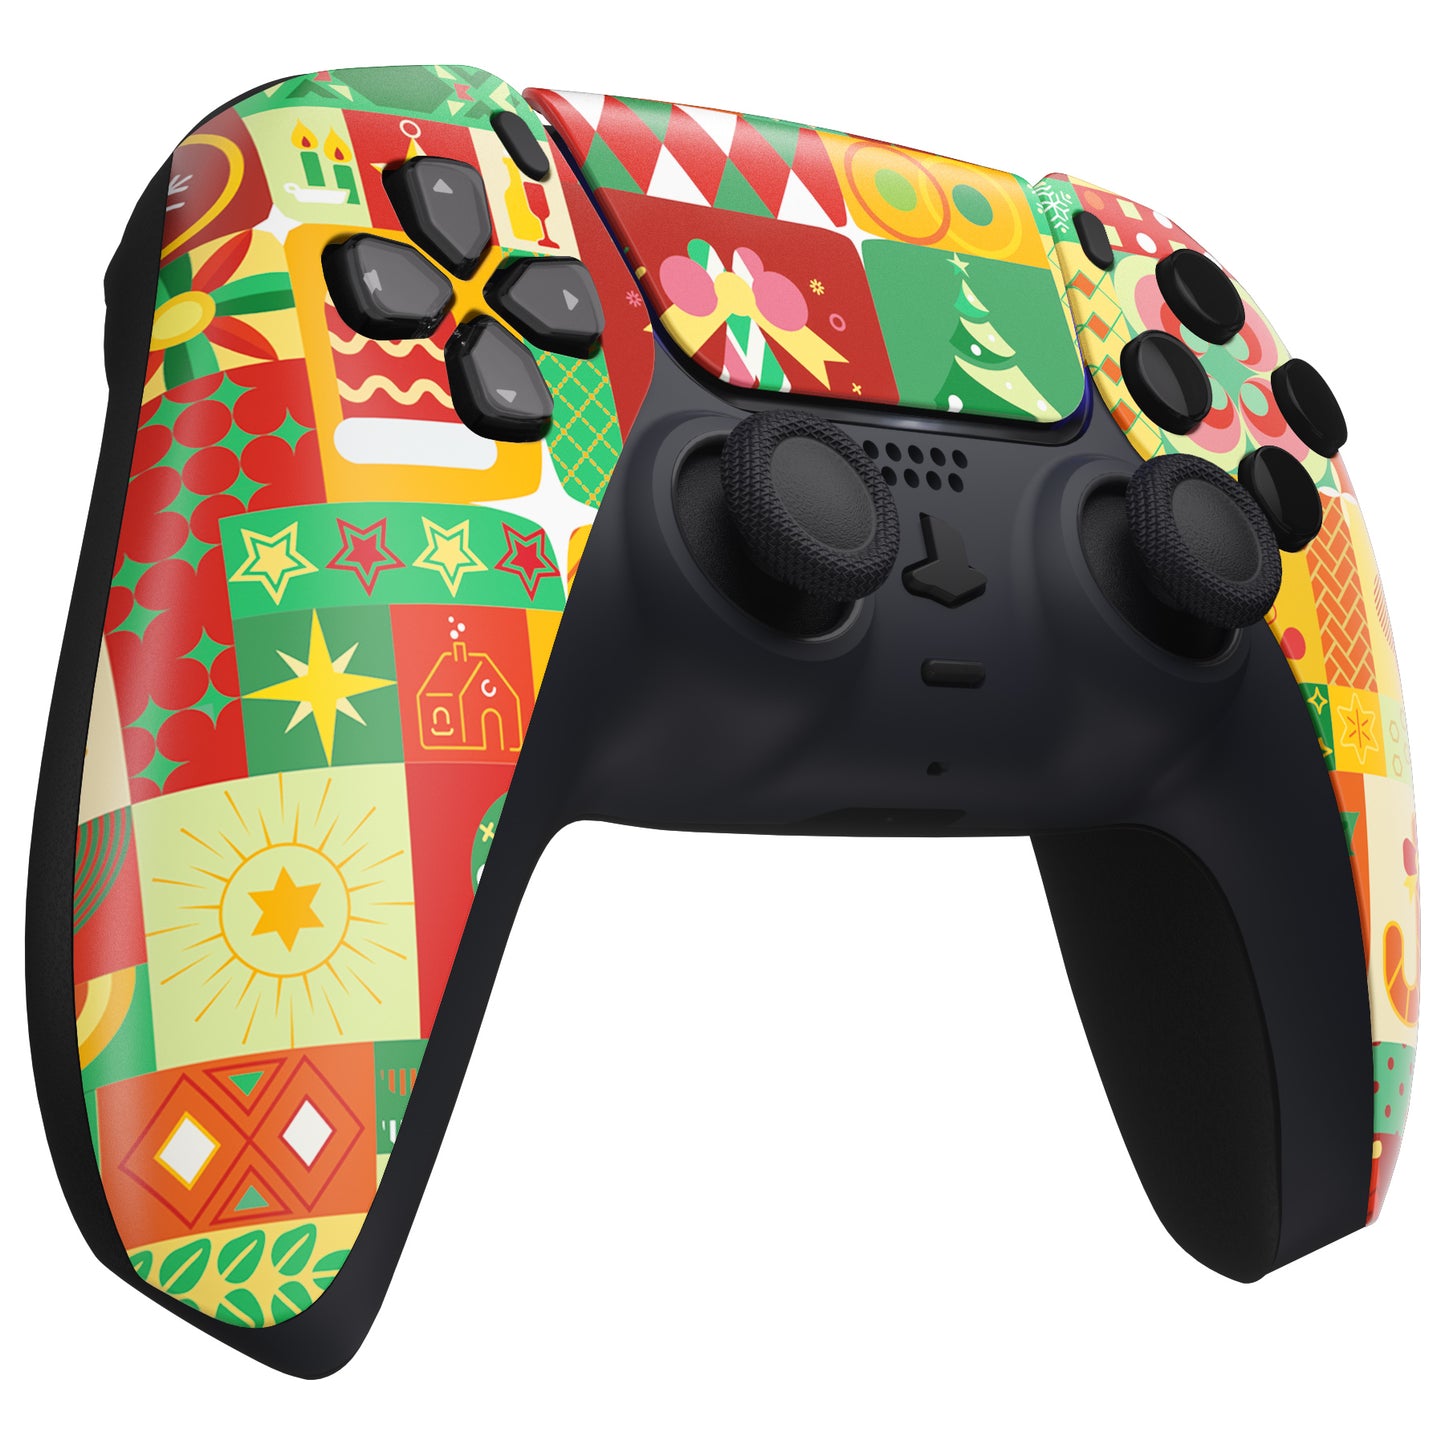 eXtremeRate Replacement Front Housing Shell with Touchpad Compatible with PS5 Controller BDM-010/020/030/040 - Christmas Wrap